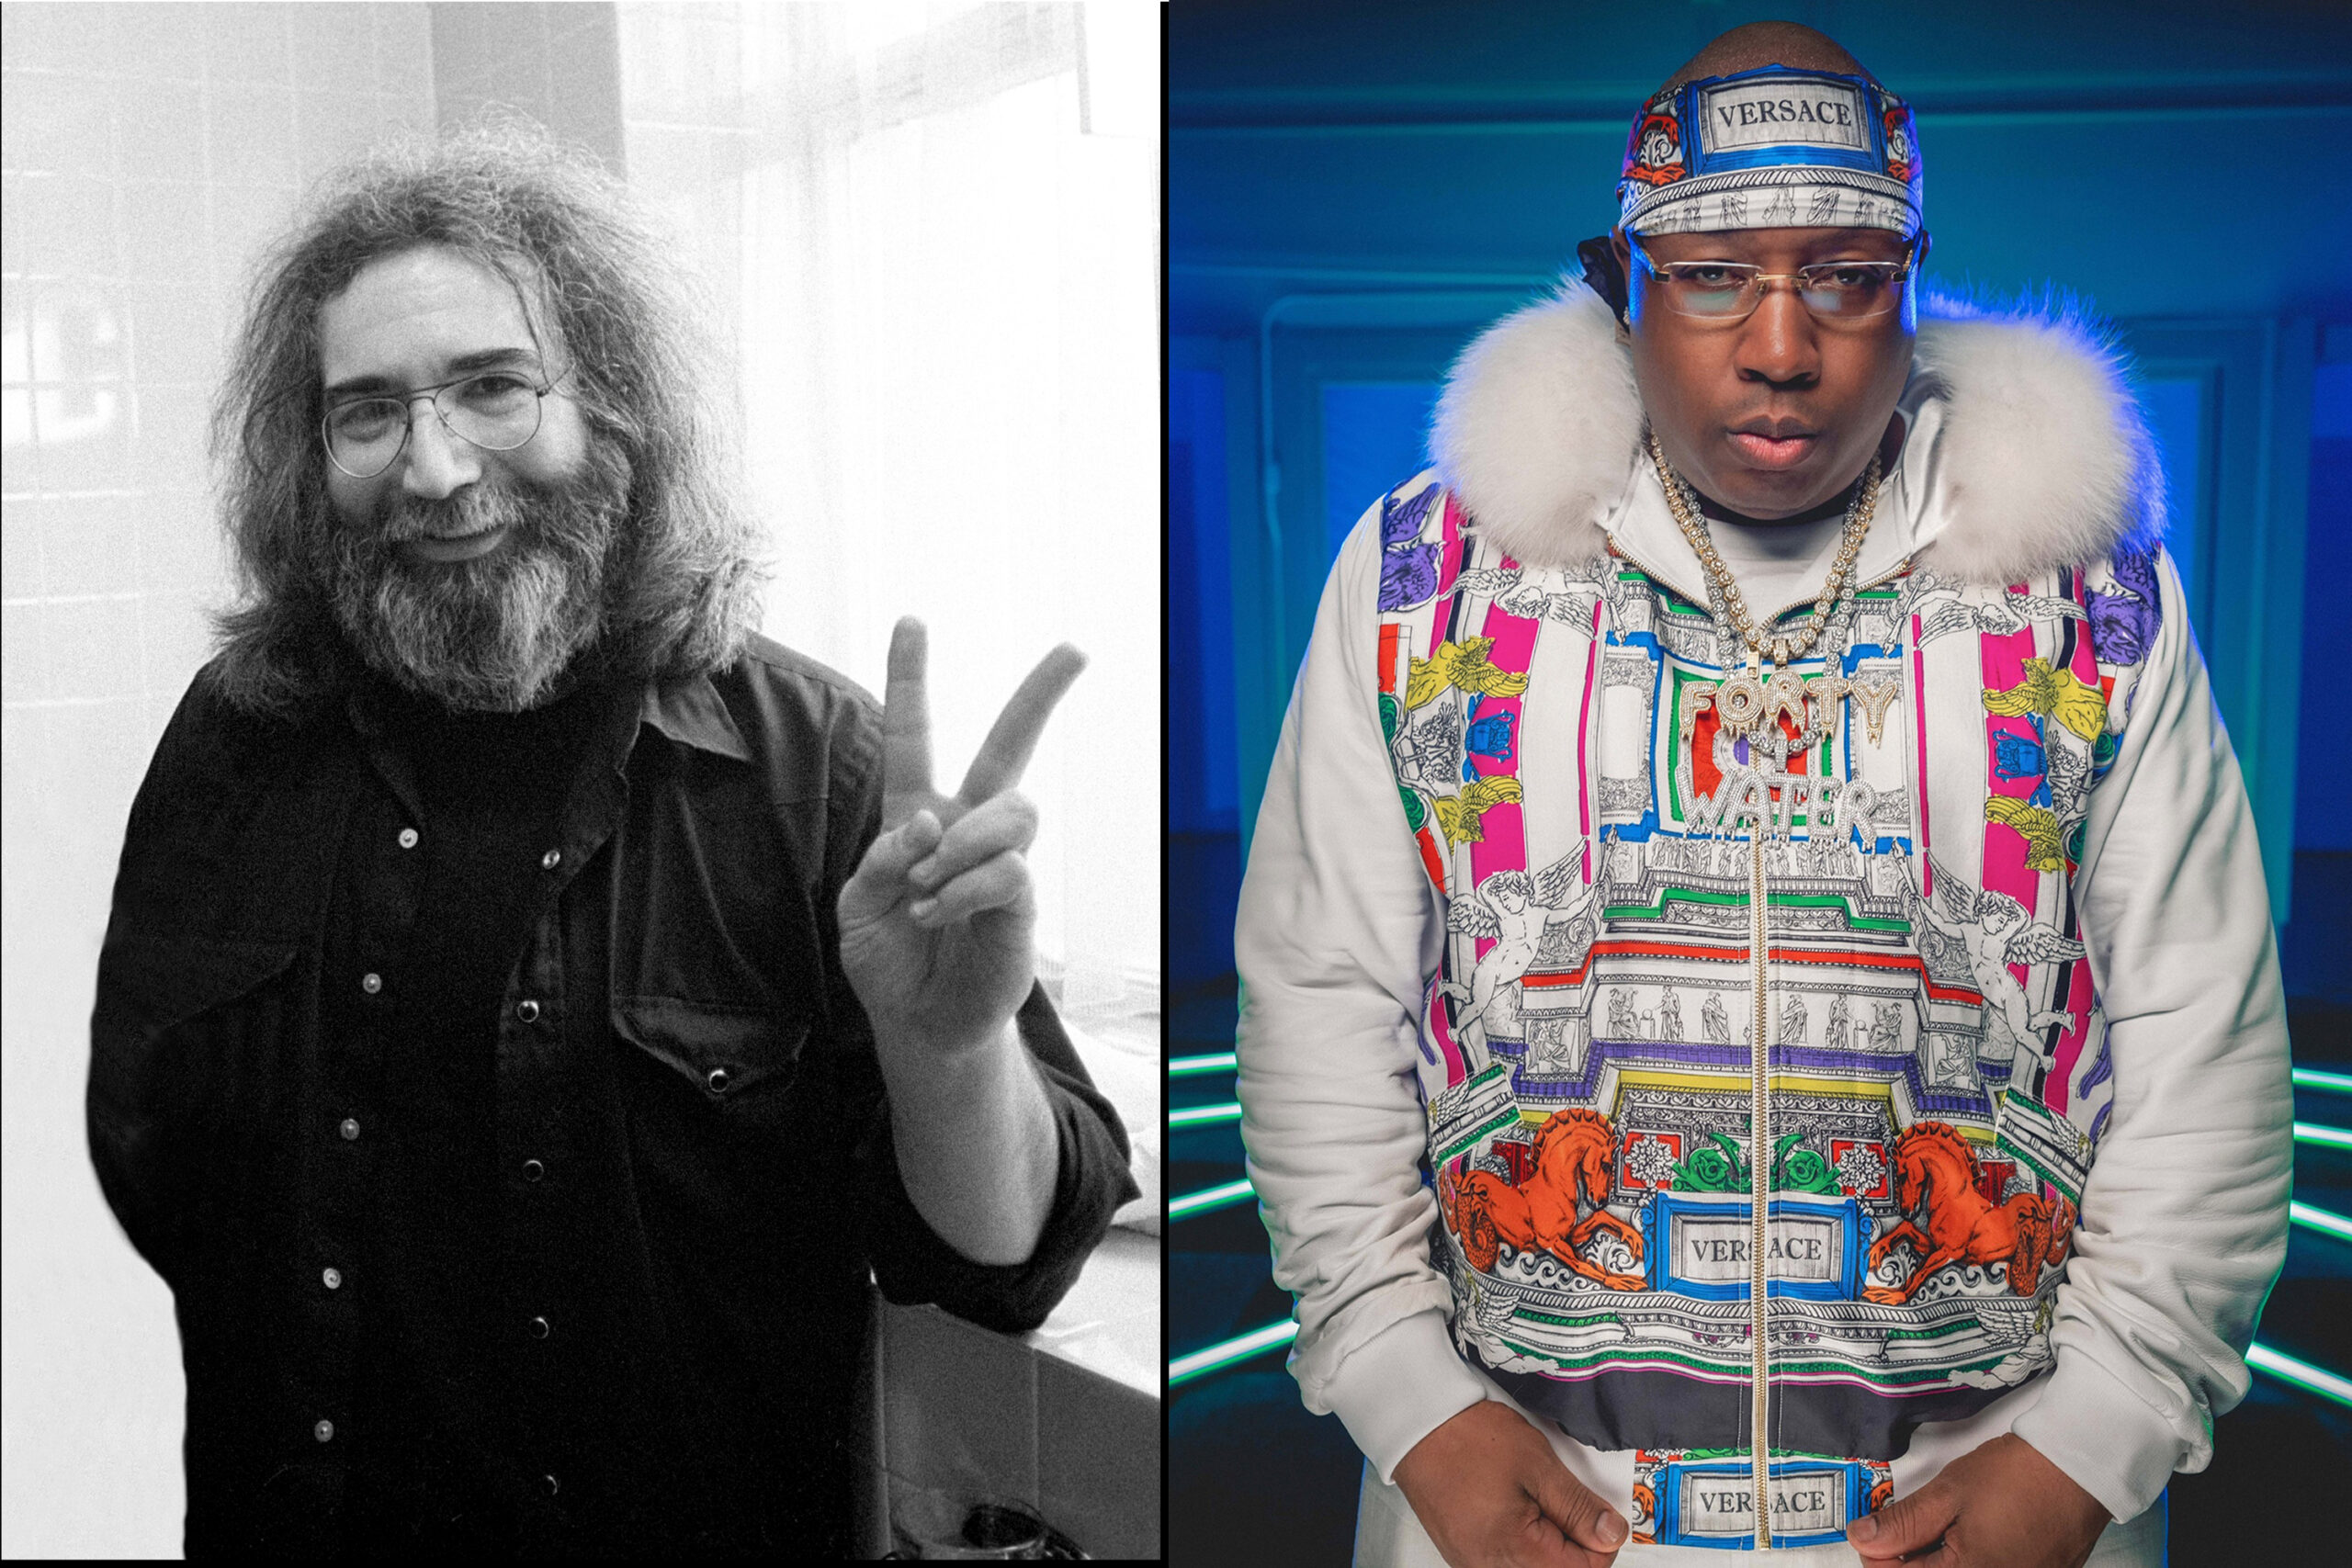 What Do E-40 and Jerry Garcia Have in Common?